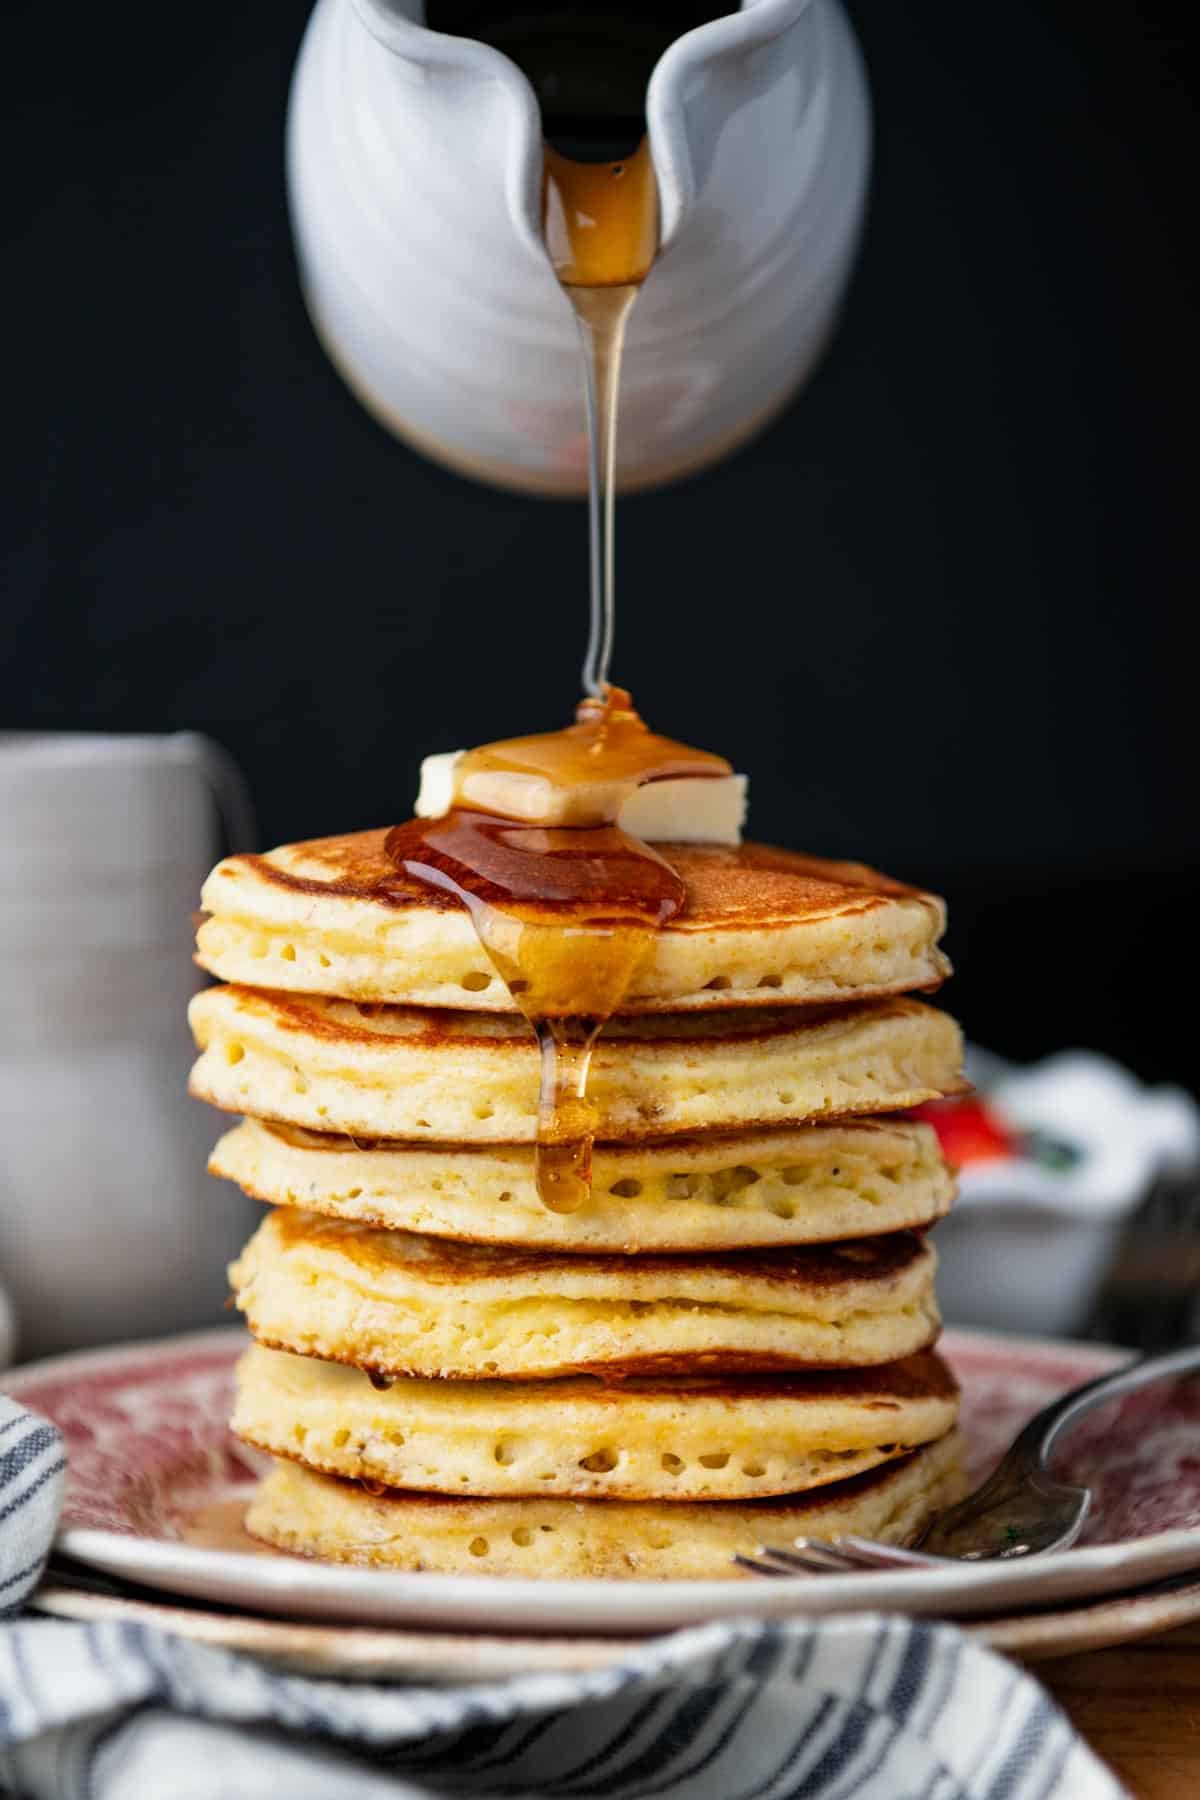 Pouring syrup over a plate of Jiffy cornmeal pancakes.